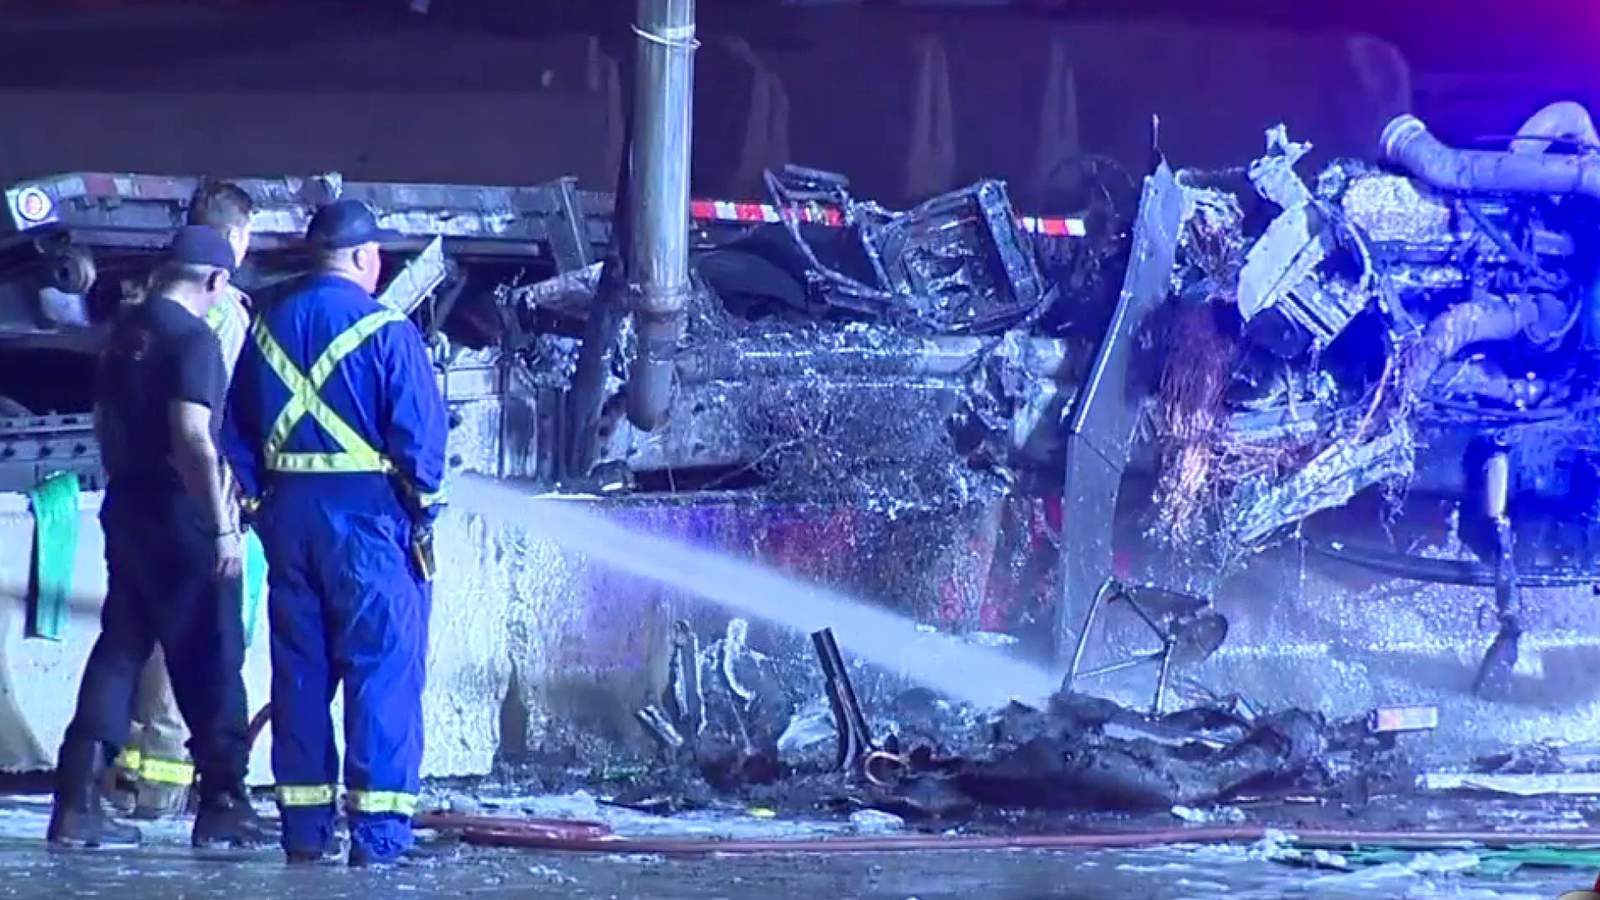 18-wheeler catches fire after crashing into construction zone along I-10 on East Side